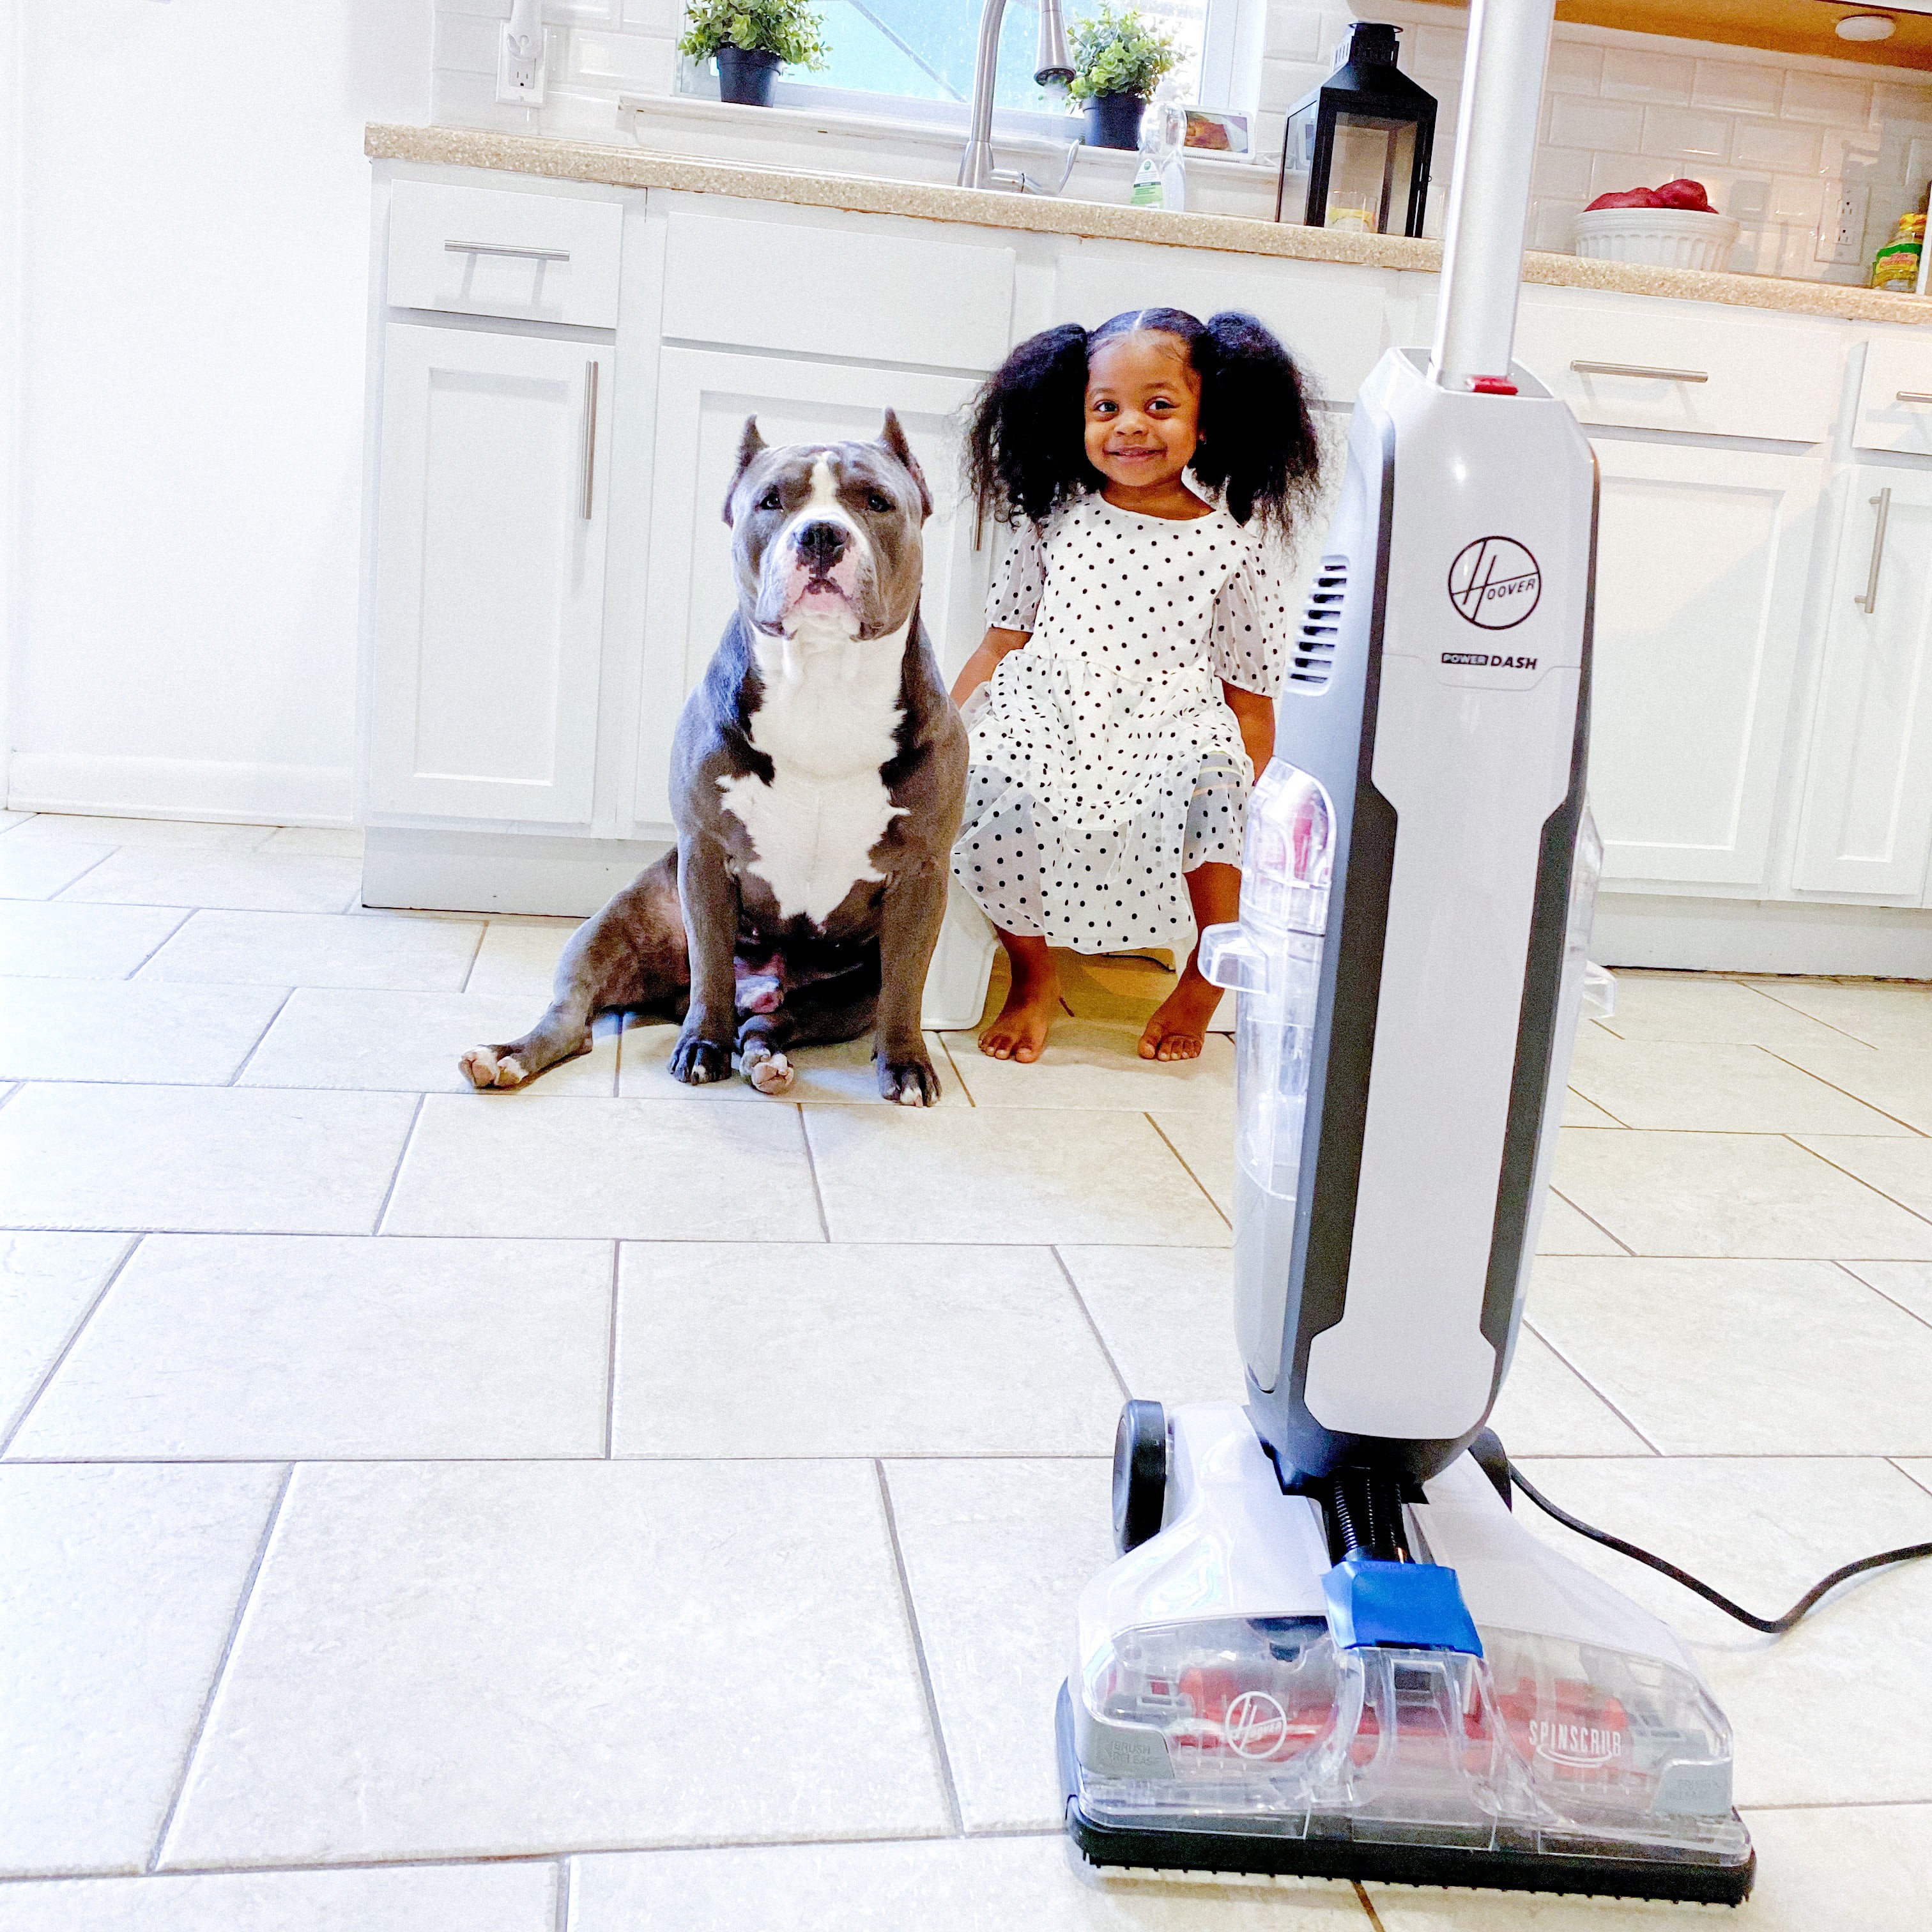 https://s3-assets.sylvane.com/media/images/products/hoover-fh41010-powerdash-hard-floor-cleaner-lifestyle.jpg